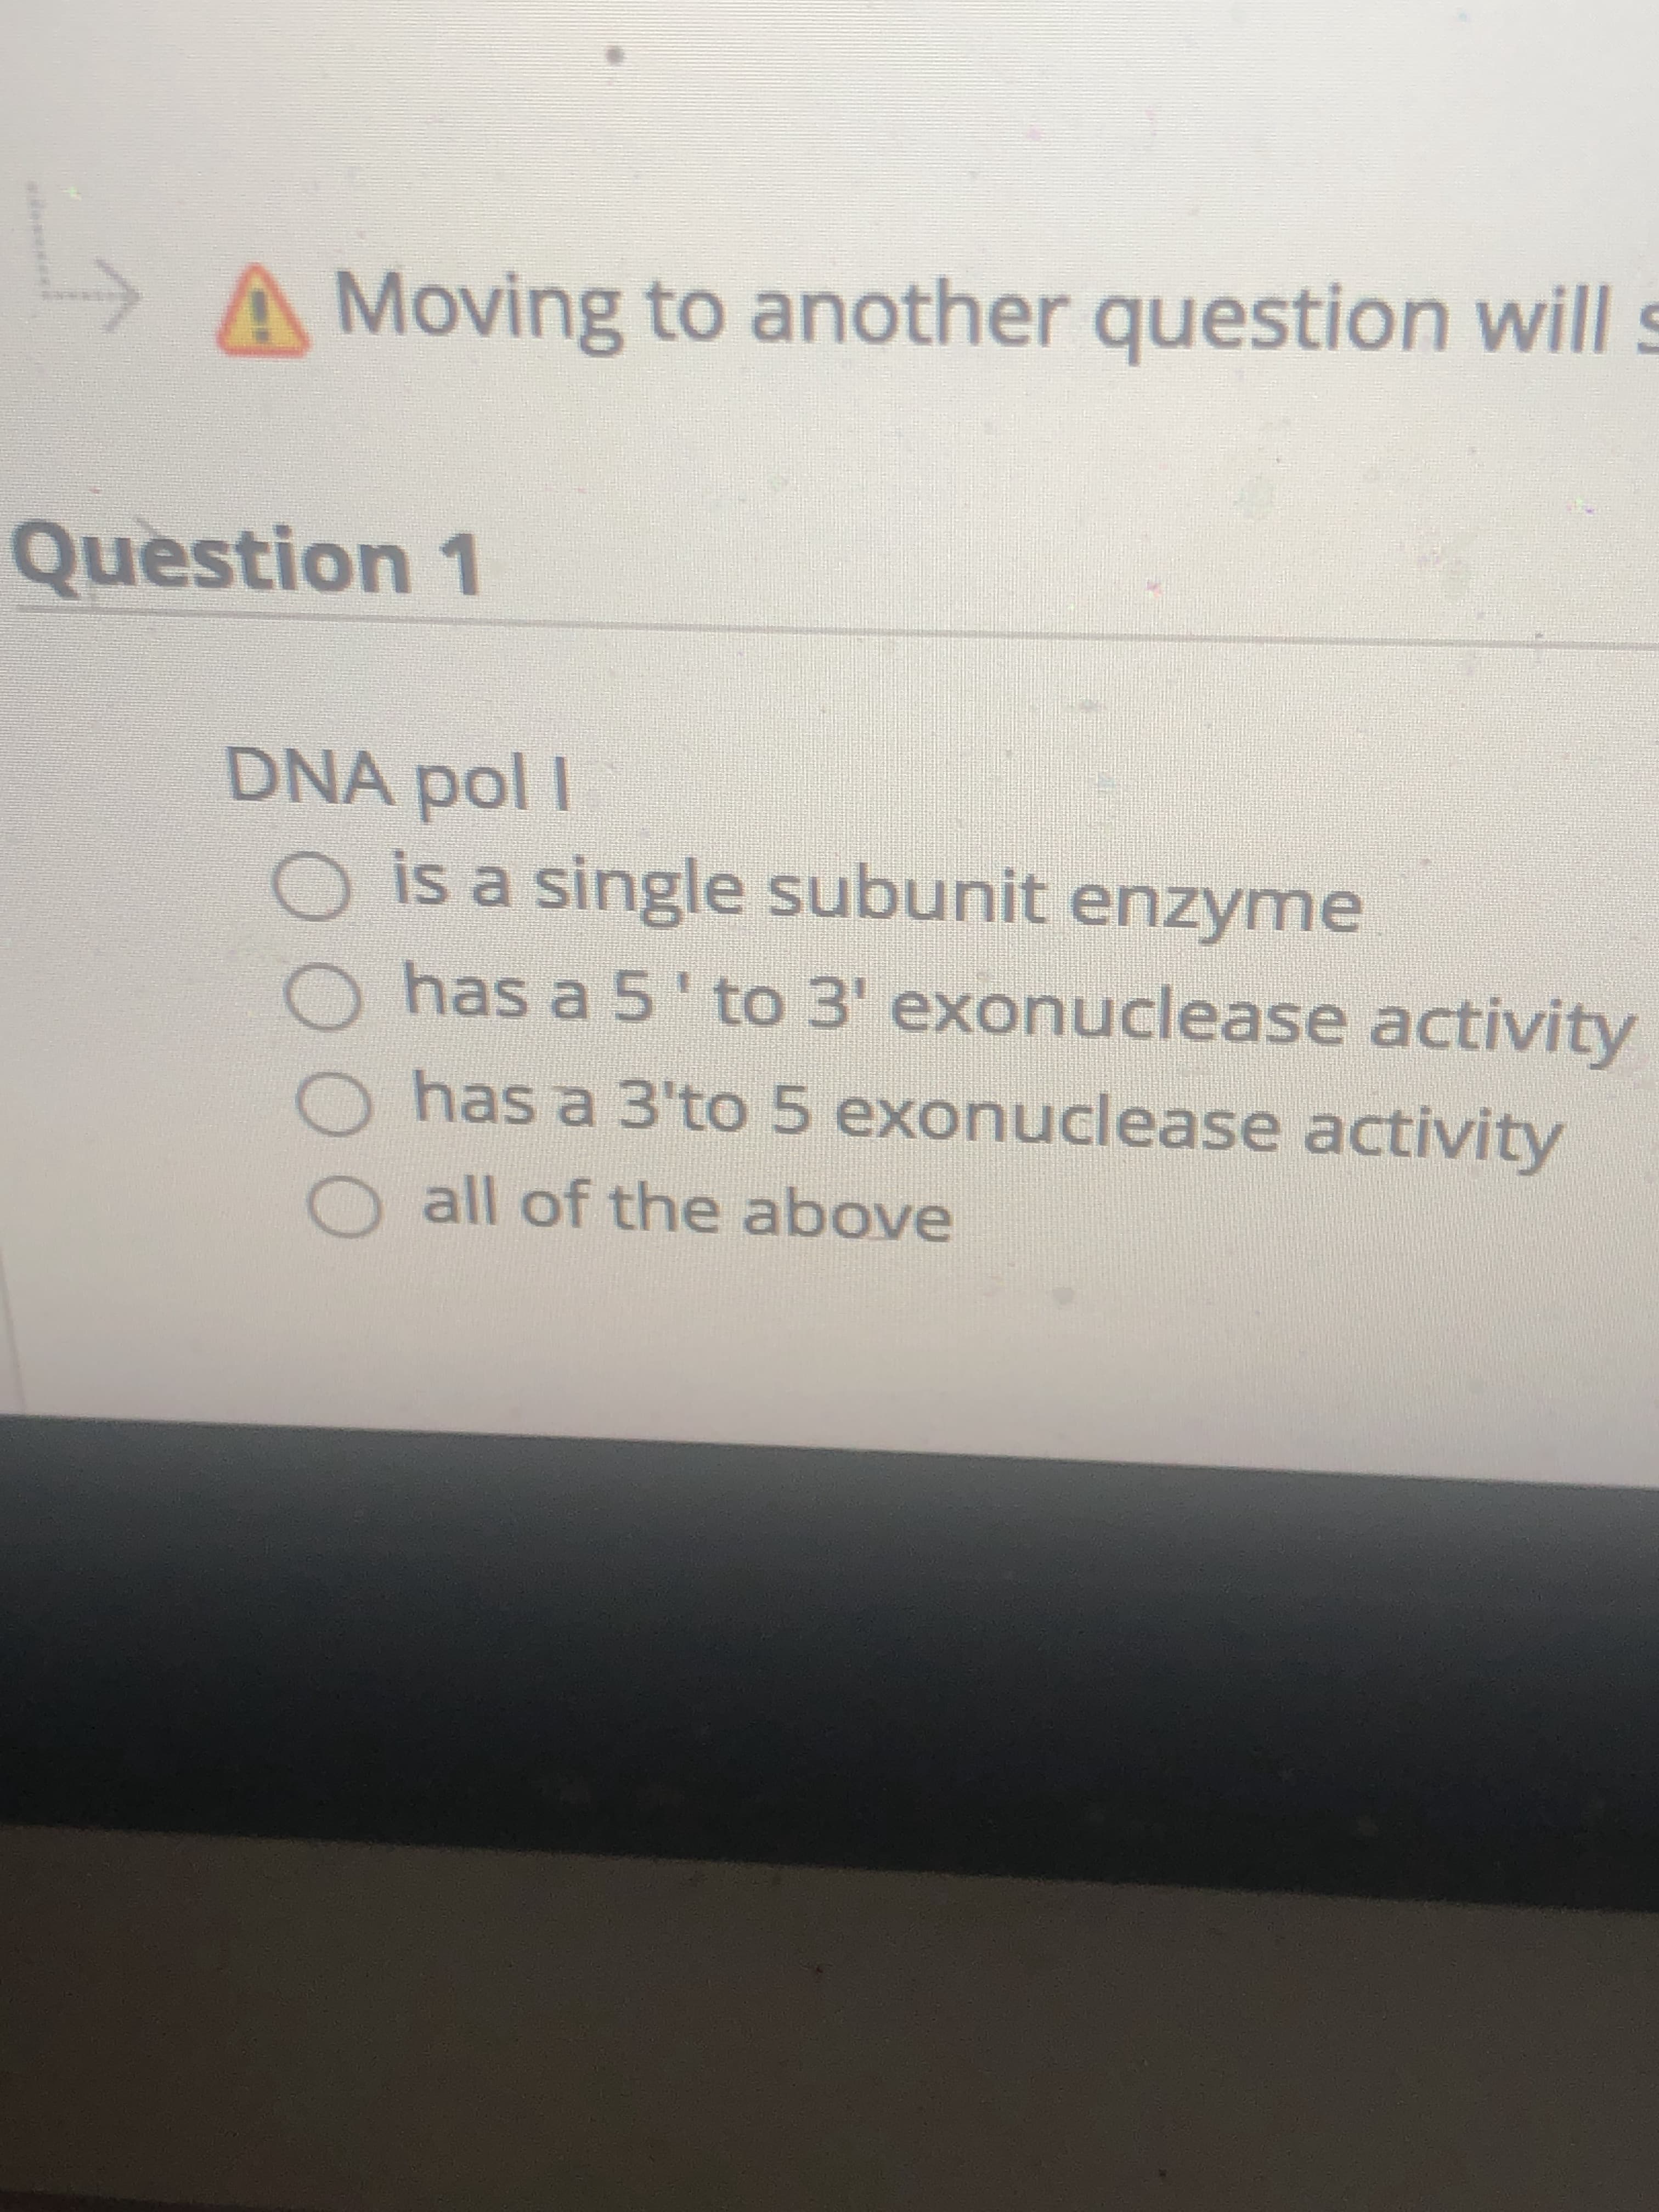 ### Question 1: DNA Polymerase I

DNA pol I (DNA Polymerase I):
- is a single subunit enzyme
- has a 5' to 3' exonuclease activity
- has a 3' to 5' exonuclease activity
- all of the above

**Explanation:** In this multiple-choice question, you are asked about the characteristics of DNA Polymerase I. The options provided are:
1. DNA pol I is a single subunit enzyme.
2. DNA pol I has a 5' to 3' exonuclease activity.
3. DNA pol I has a 3' to 5' exonuclease activity.
4. All of the above (implying that DNA pol I possesses all these features).

**Note:** An exclamation mark symbol and a warning message are displayed at the top of the screen, stating, "⚠️ Moving to another question will...". The rest of the warning message is not visible in the provided image.